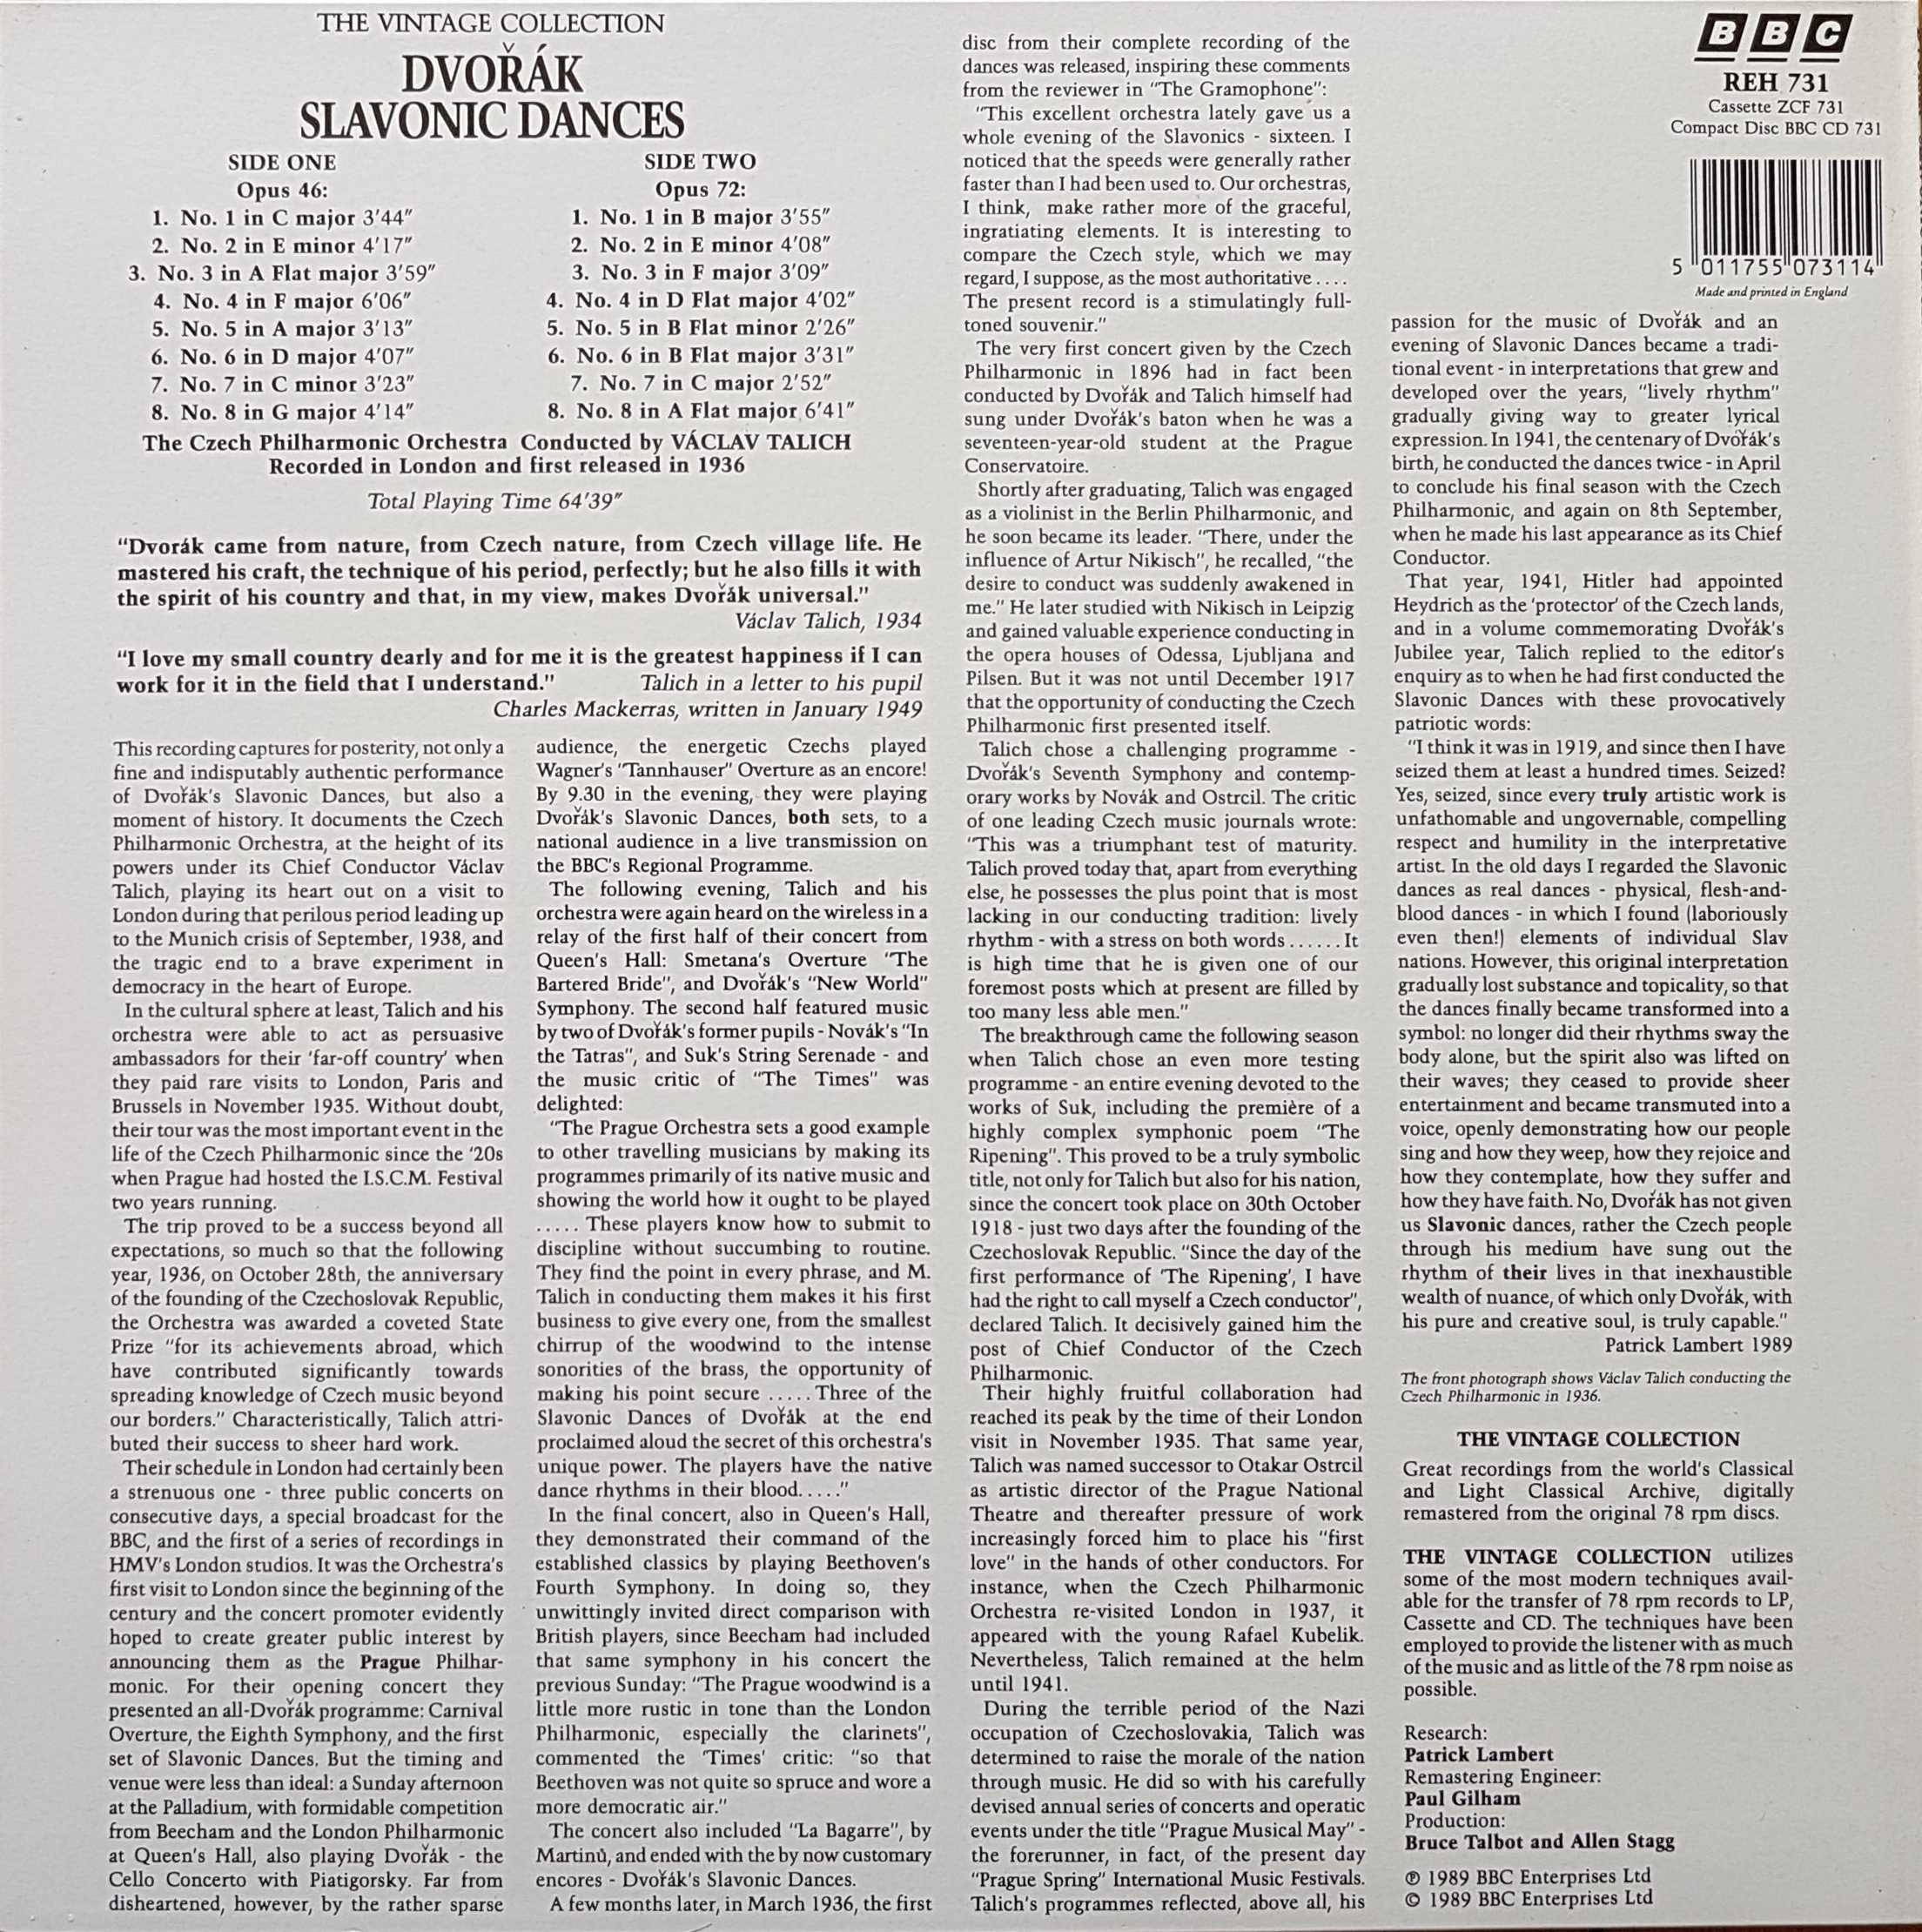 Back cover of REH 731